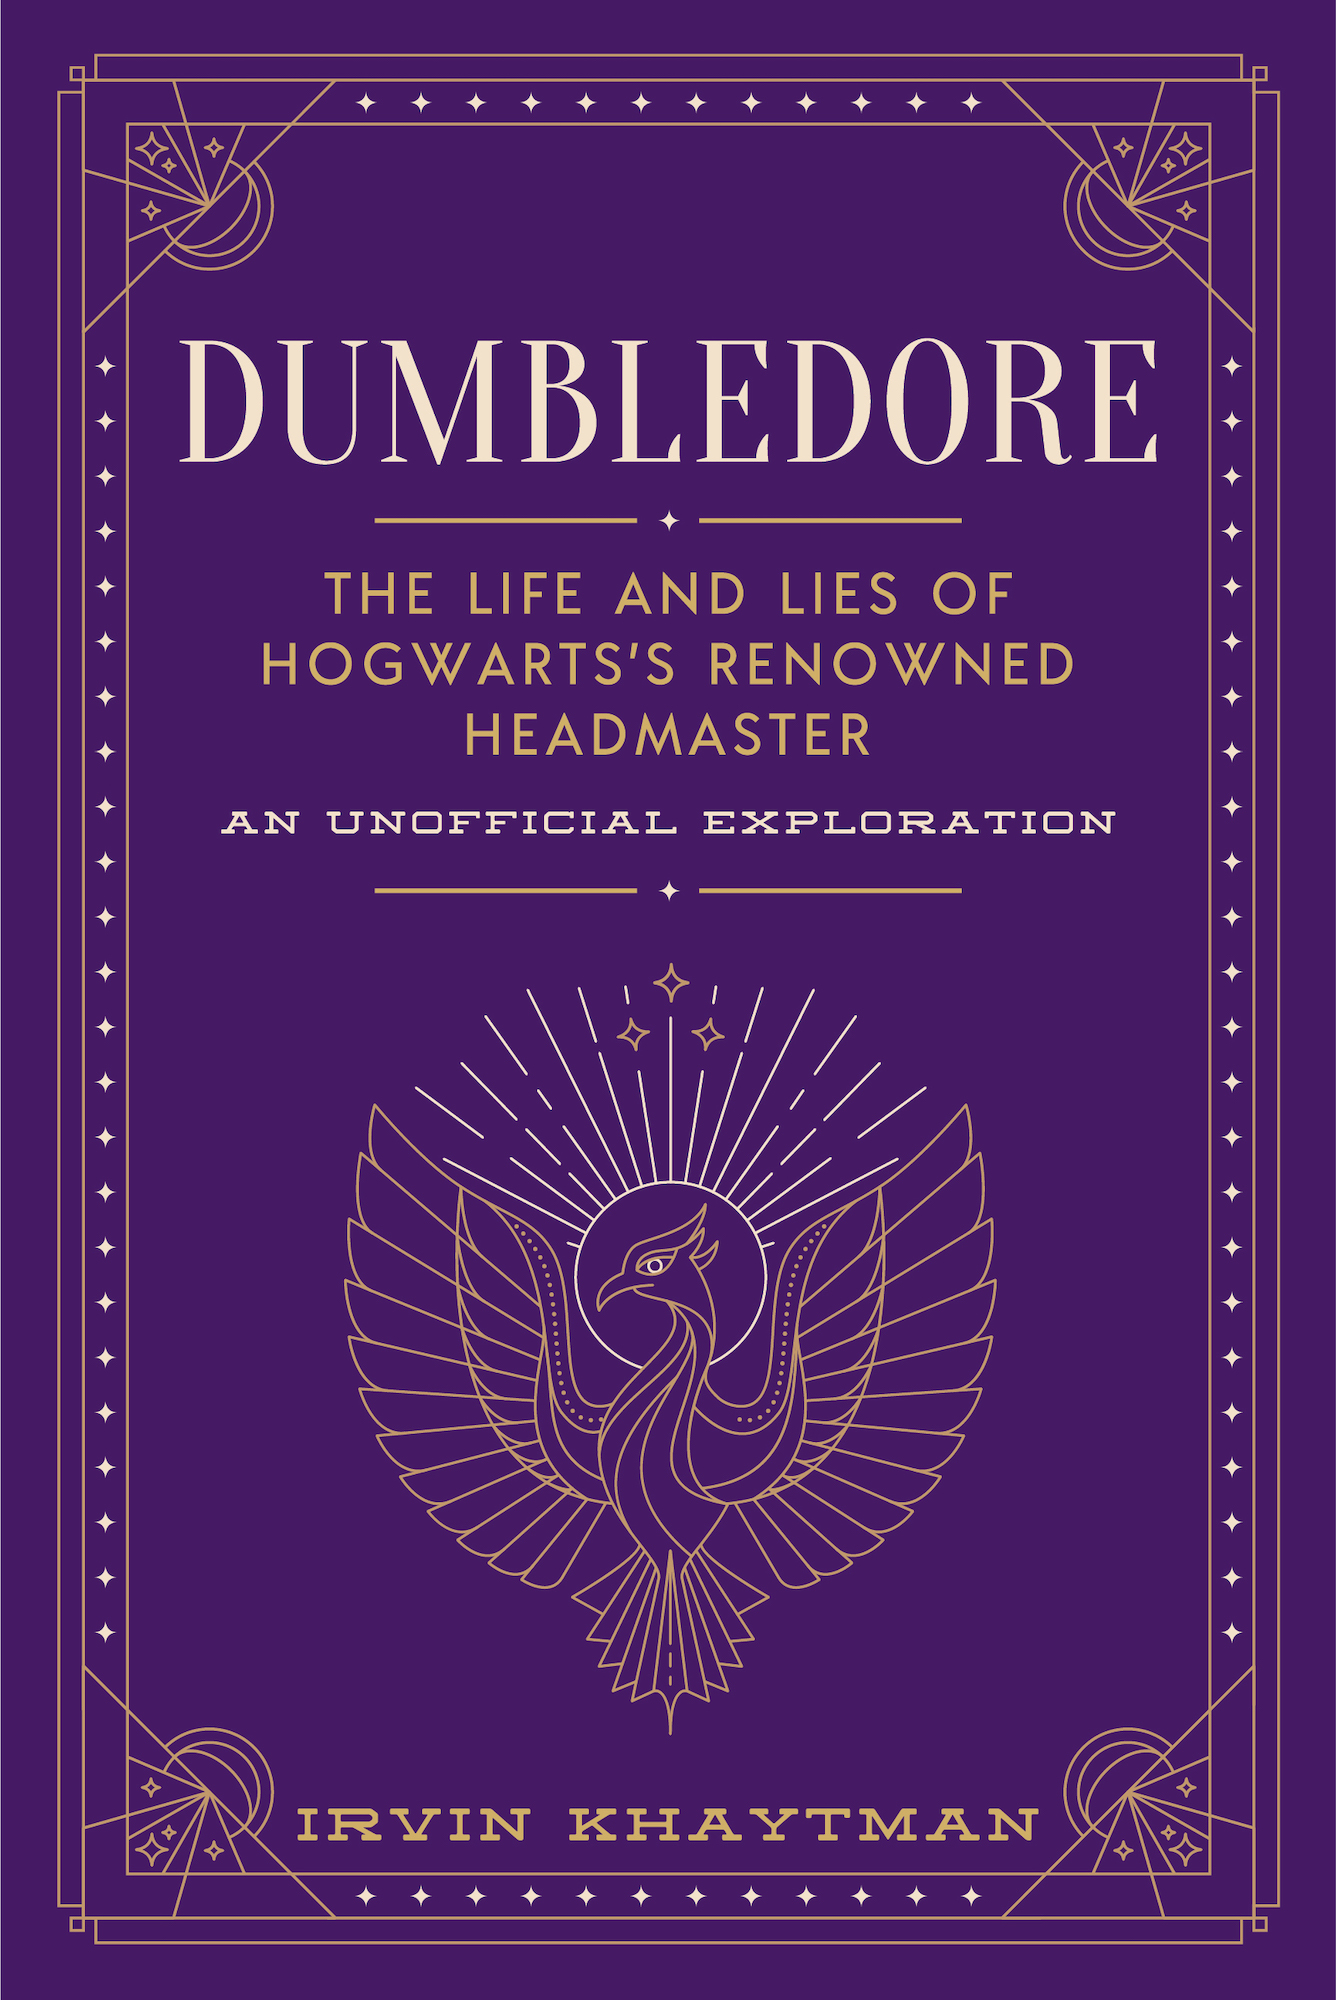 “Dumbledore: The Life and Lies of Hogwarts’s Renowned Headmaster: An Unofficial Exploration”